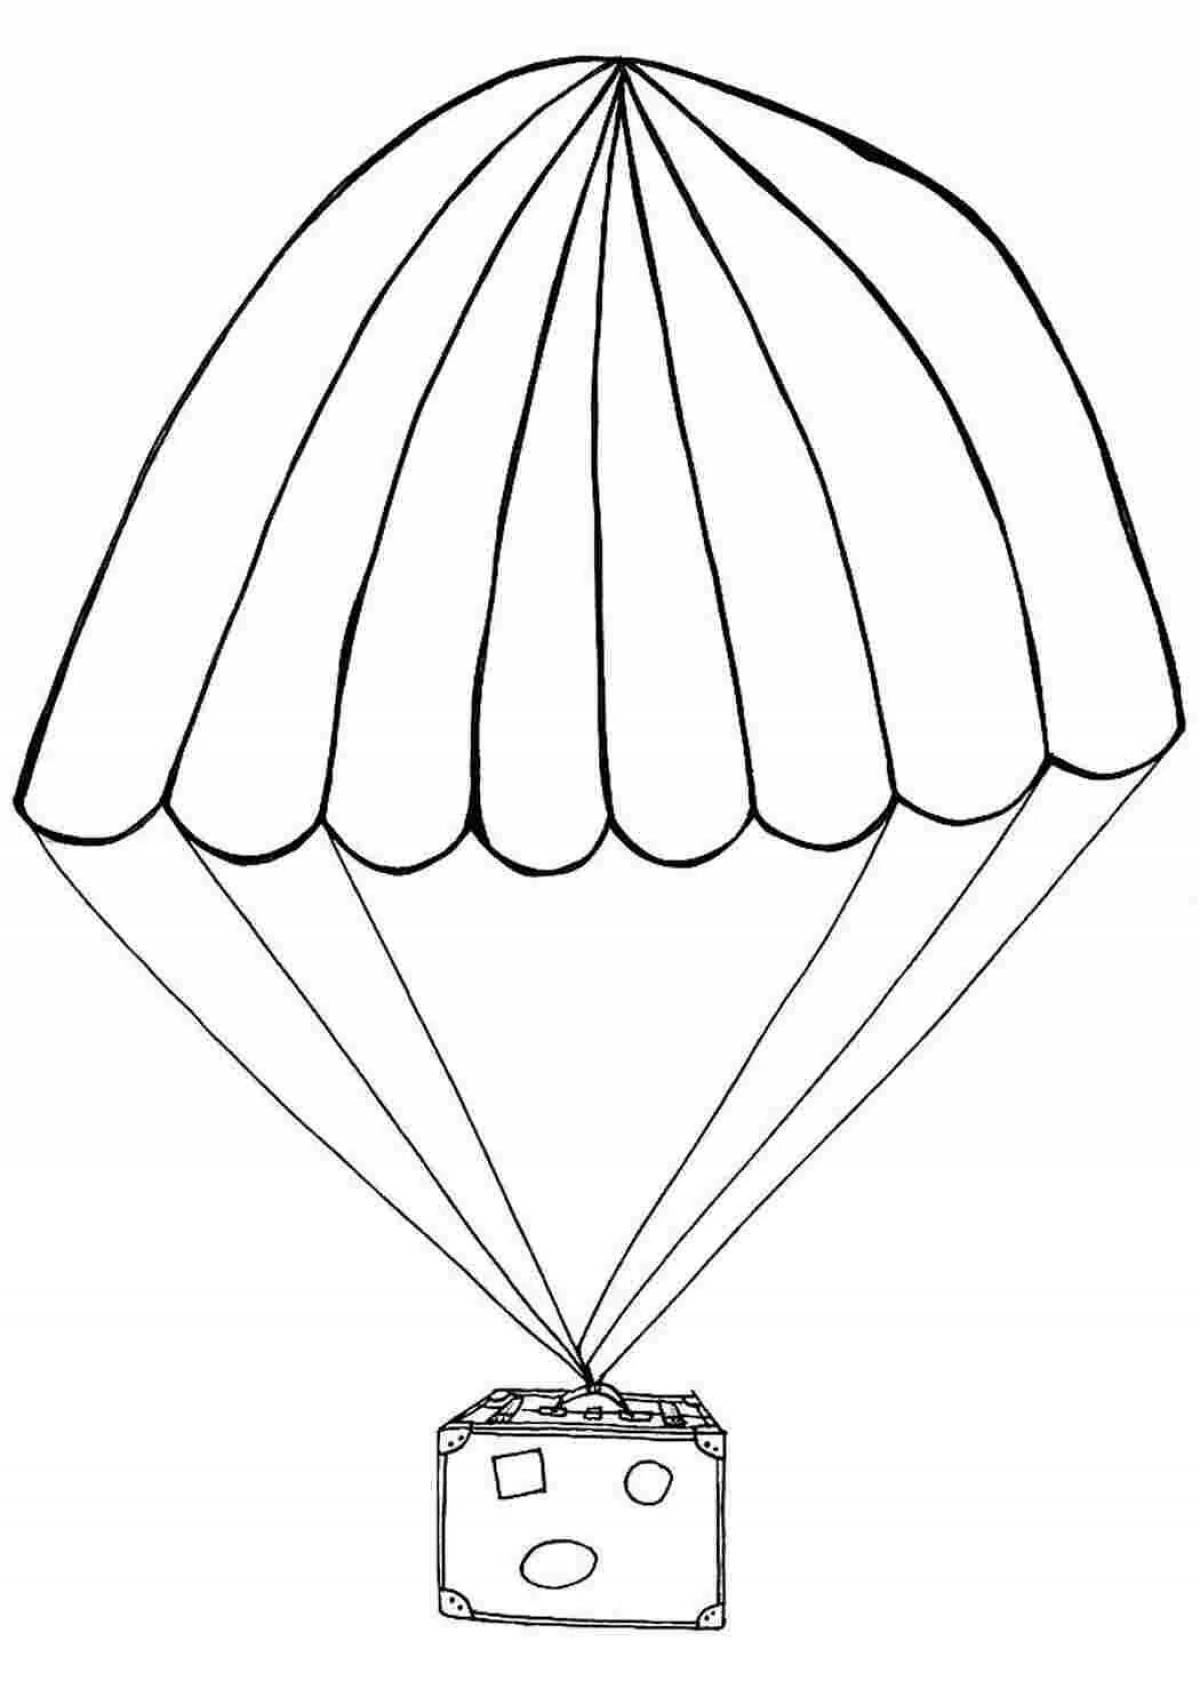 Nice parachute coloring book for the little ones